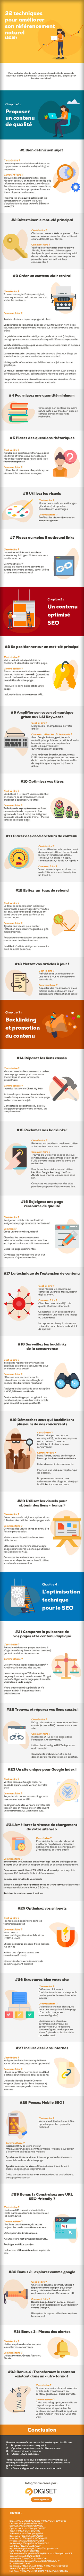 referencement naturel infographie